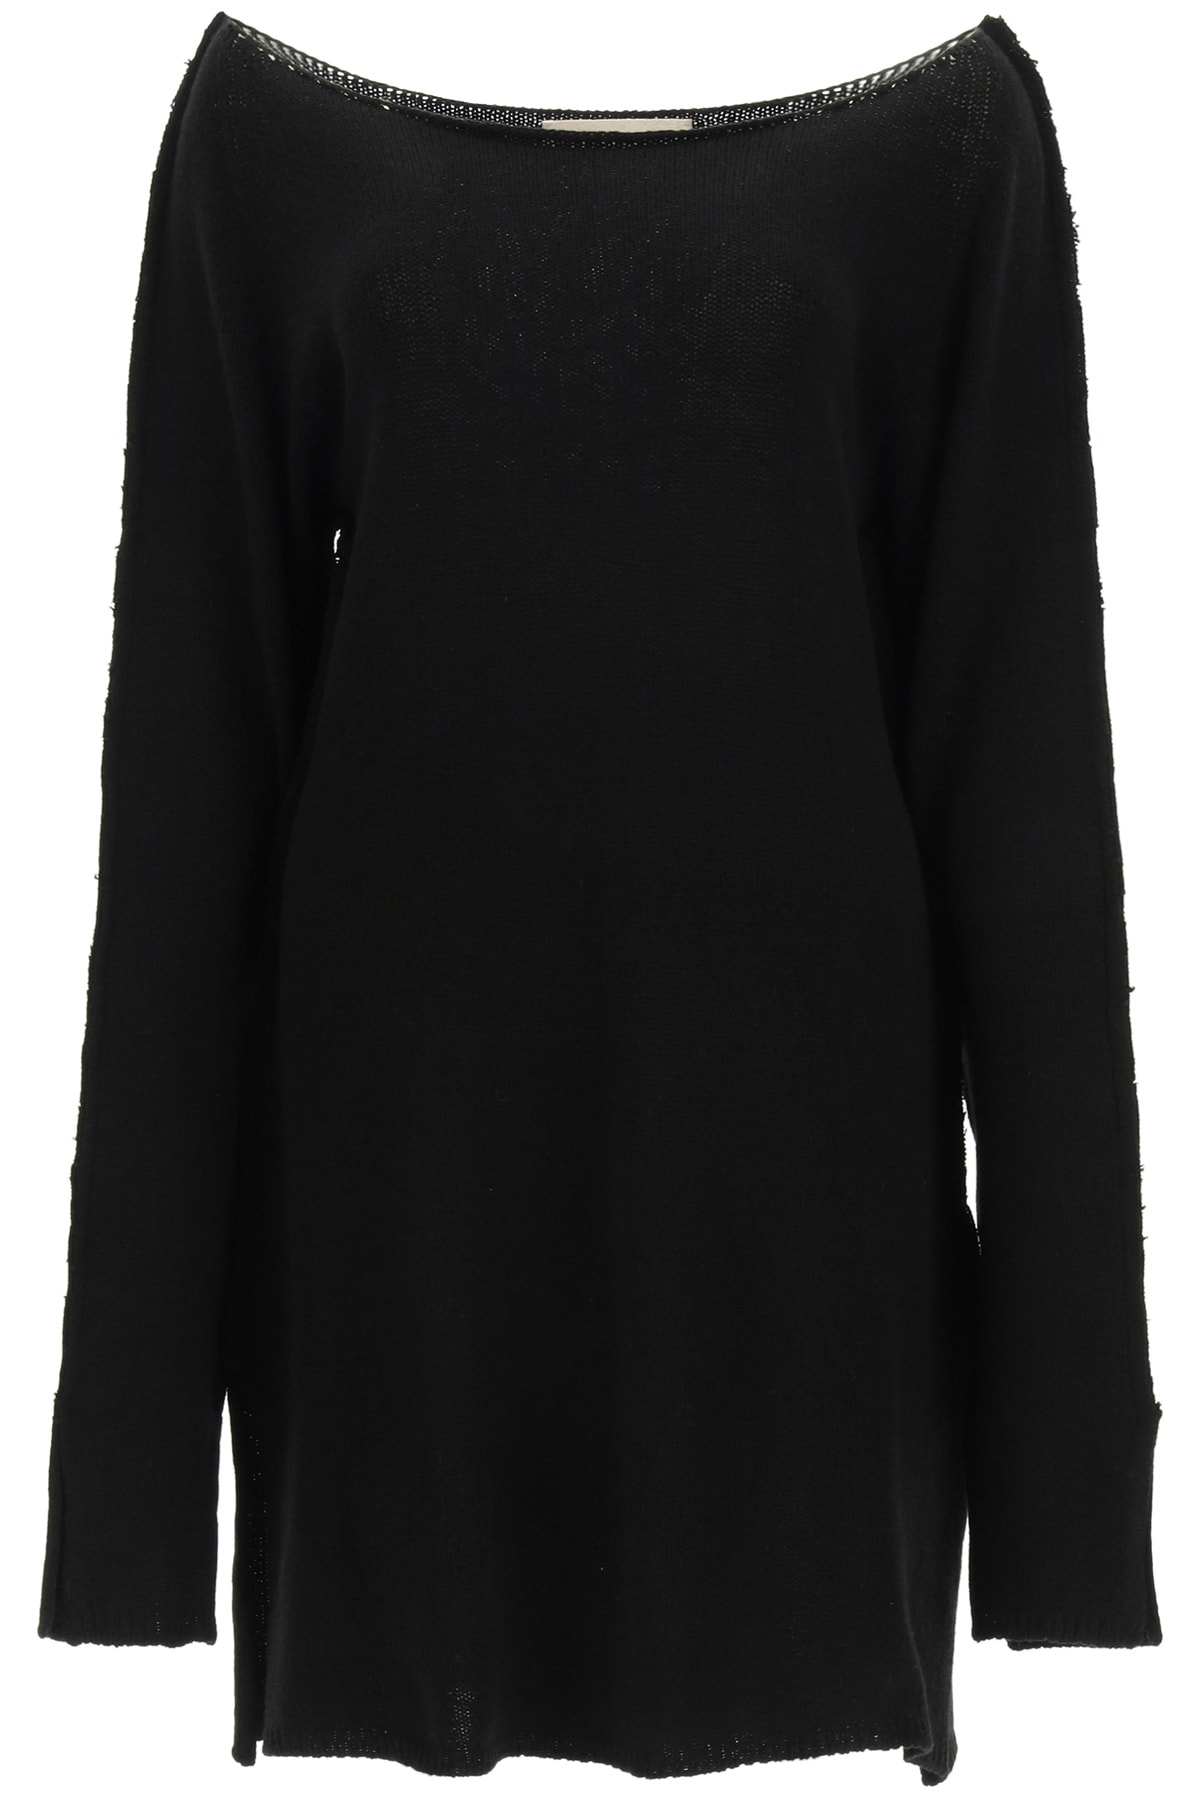 Marni Recycled Cashmere Dress